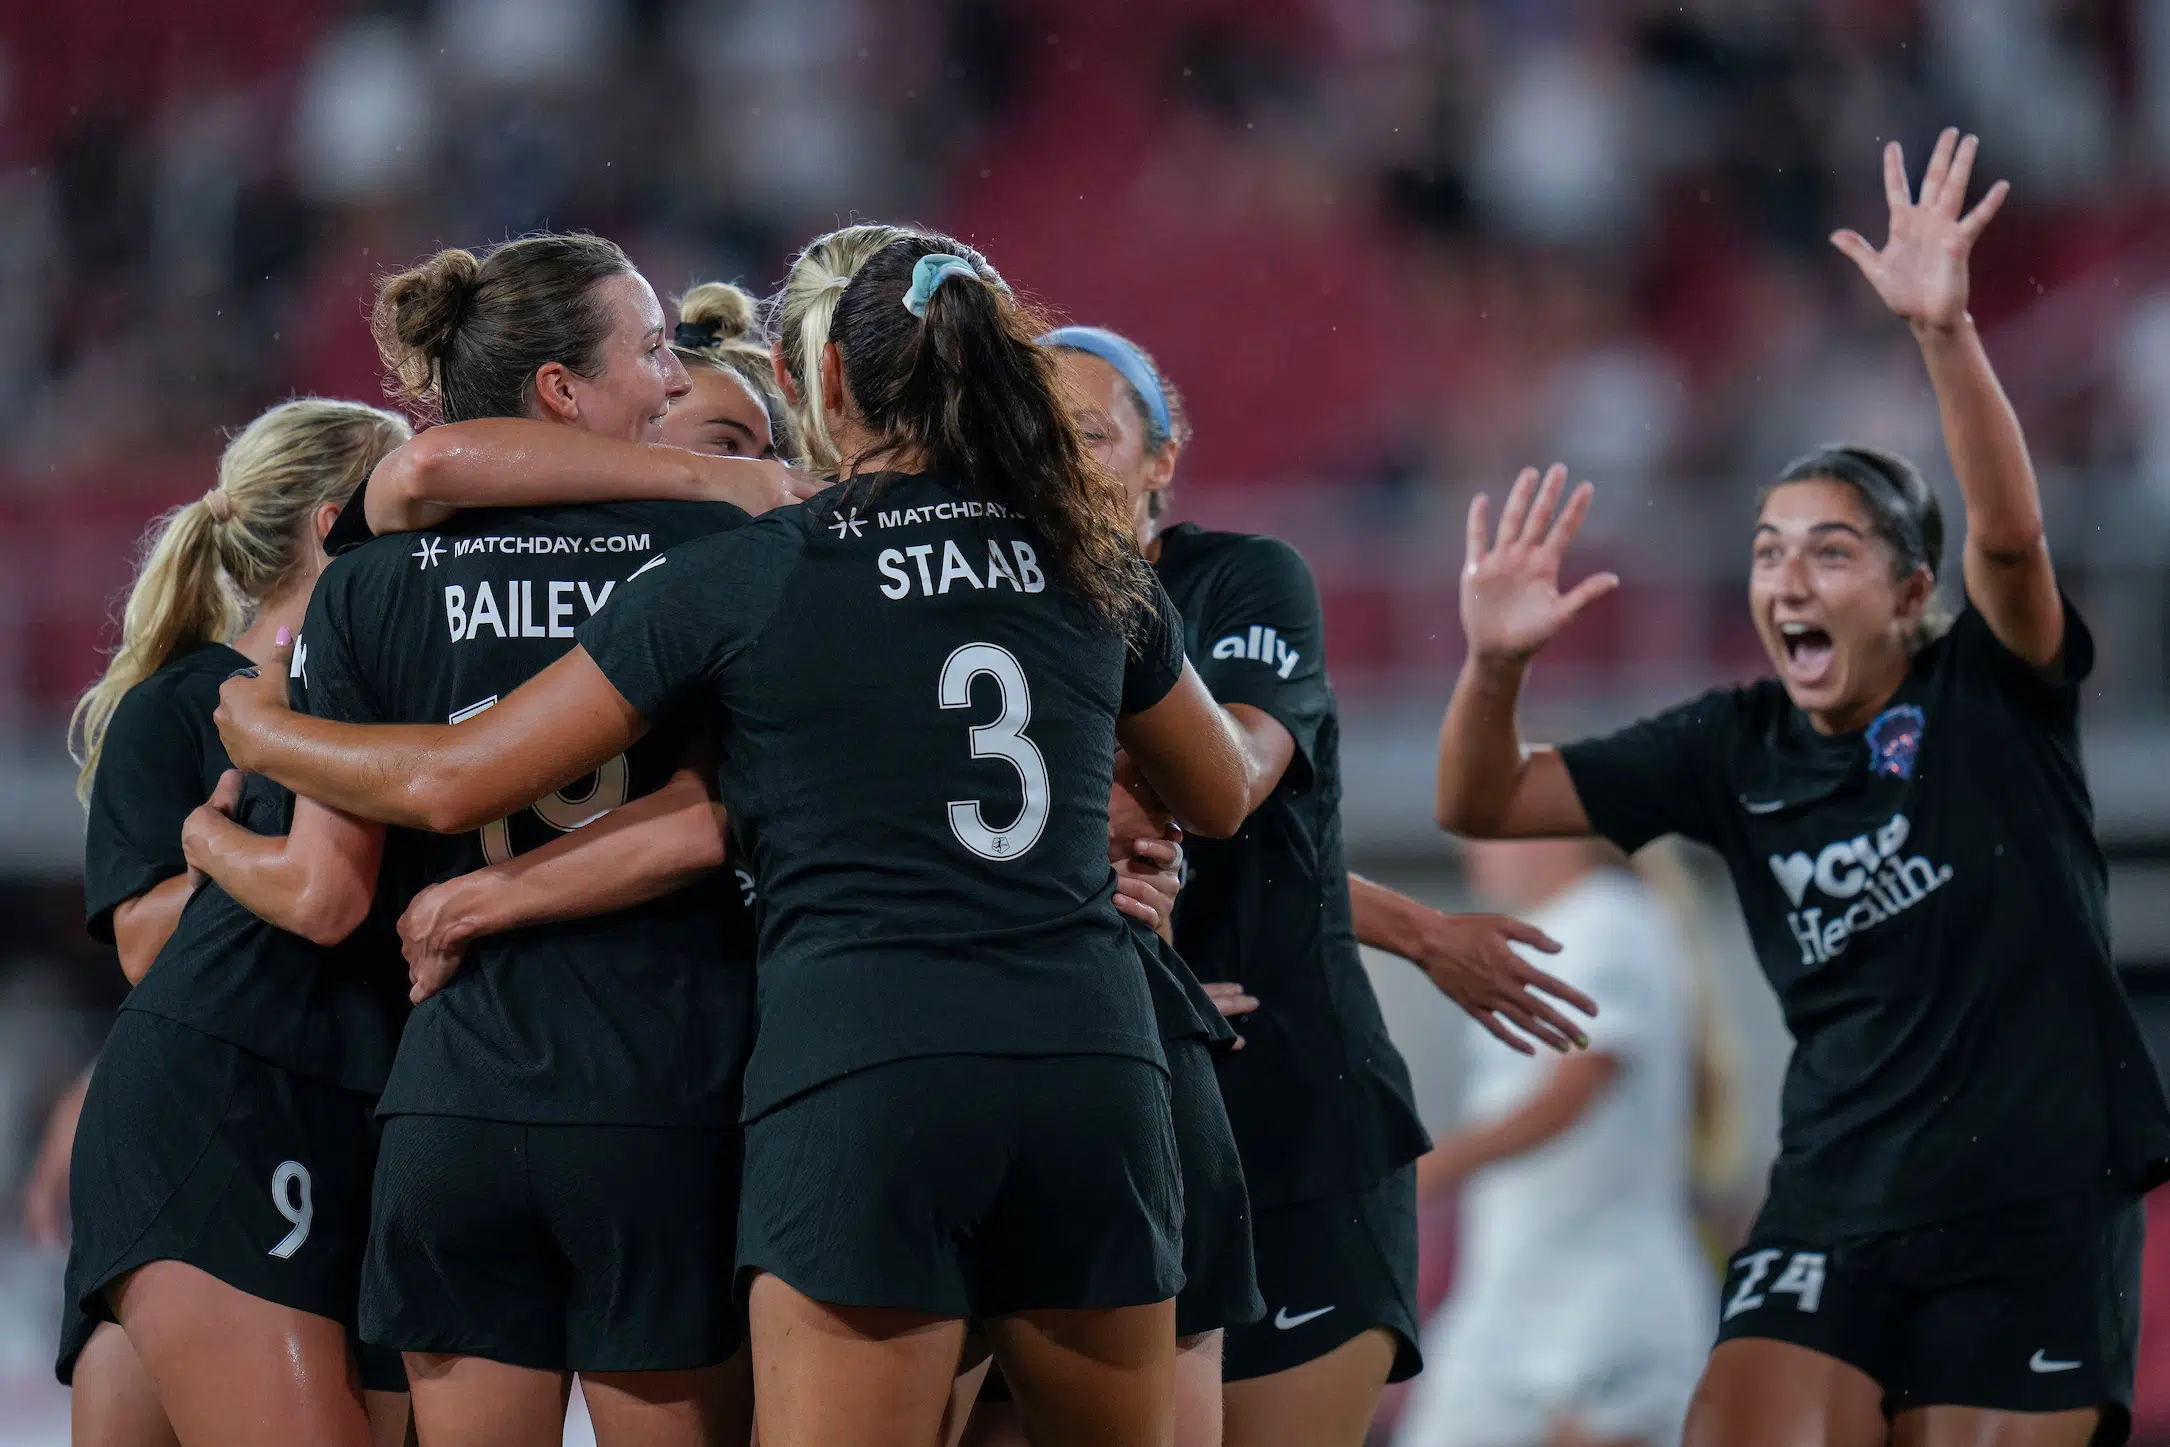 A group of soccer players in black uniforms hugs in celebration as Lena Silano in a black uniform runs towards the group with a wide smile and hands in the air.